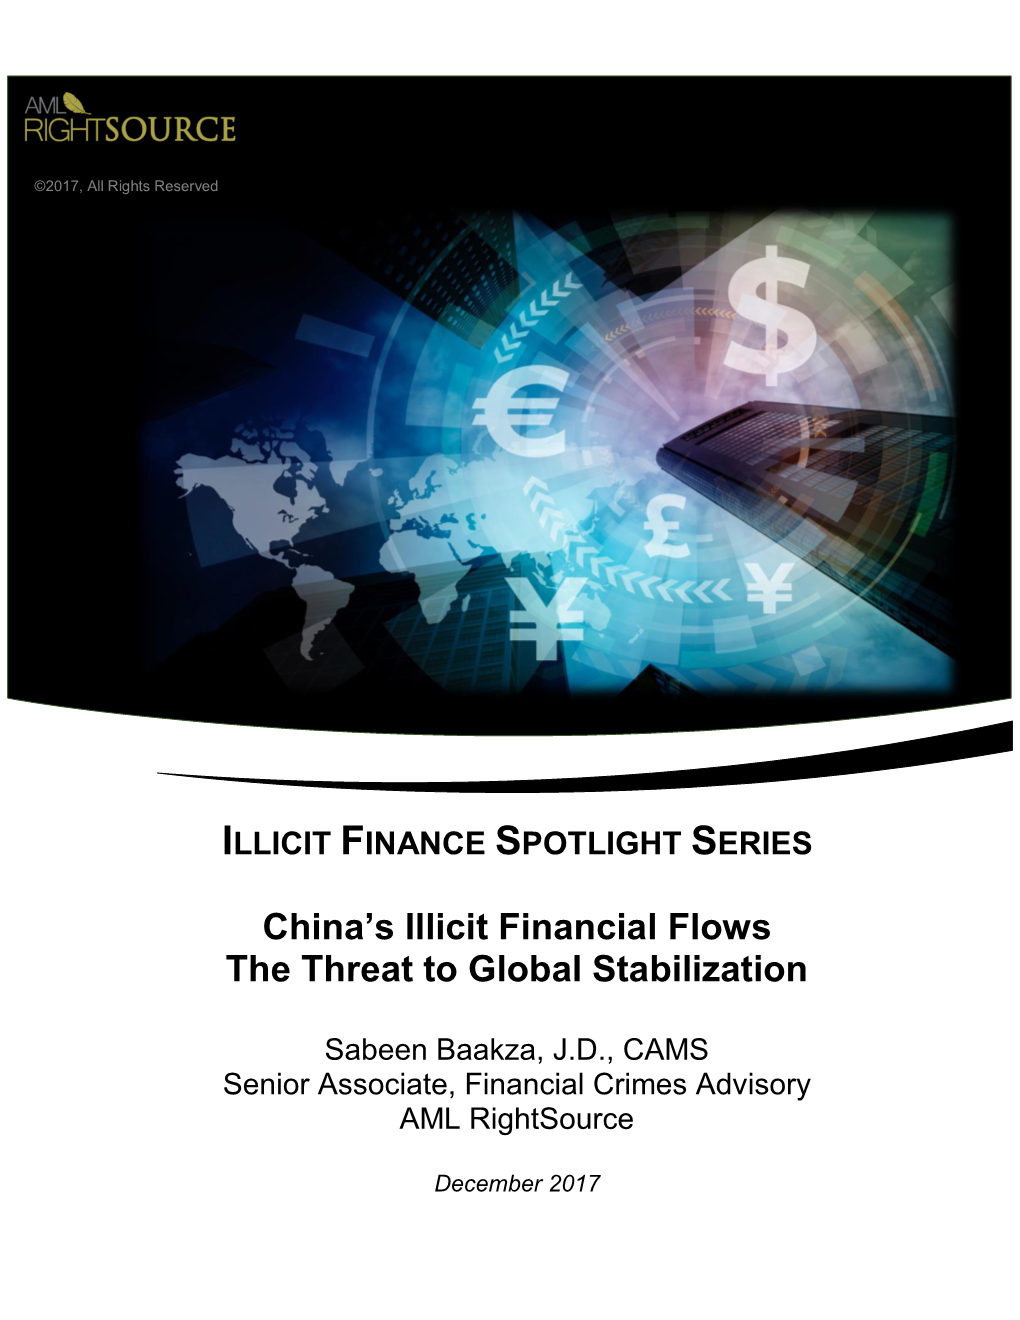 China's Illicit Financial Flows